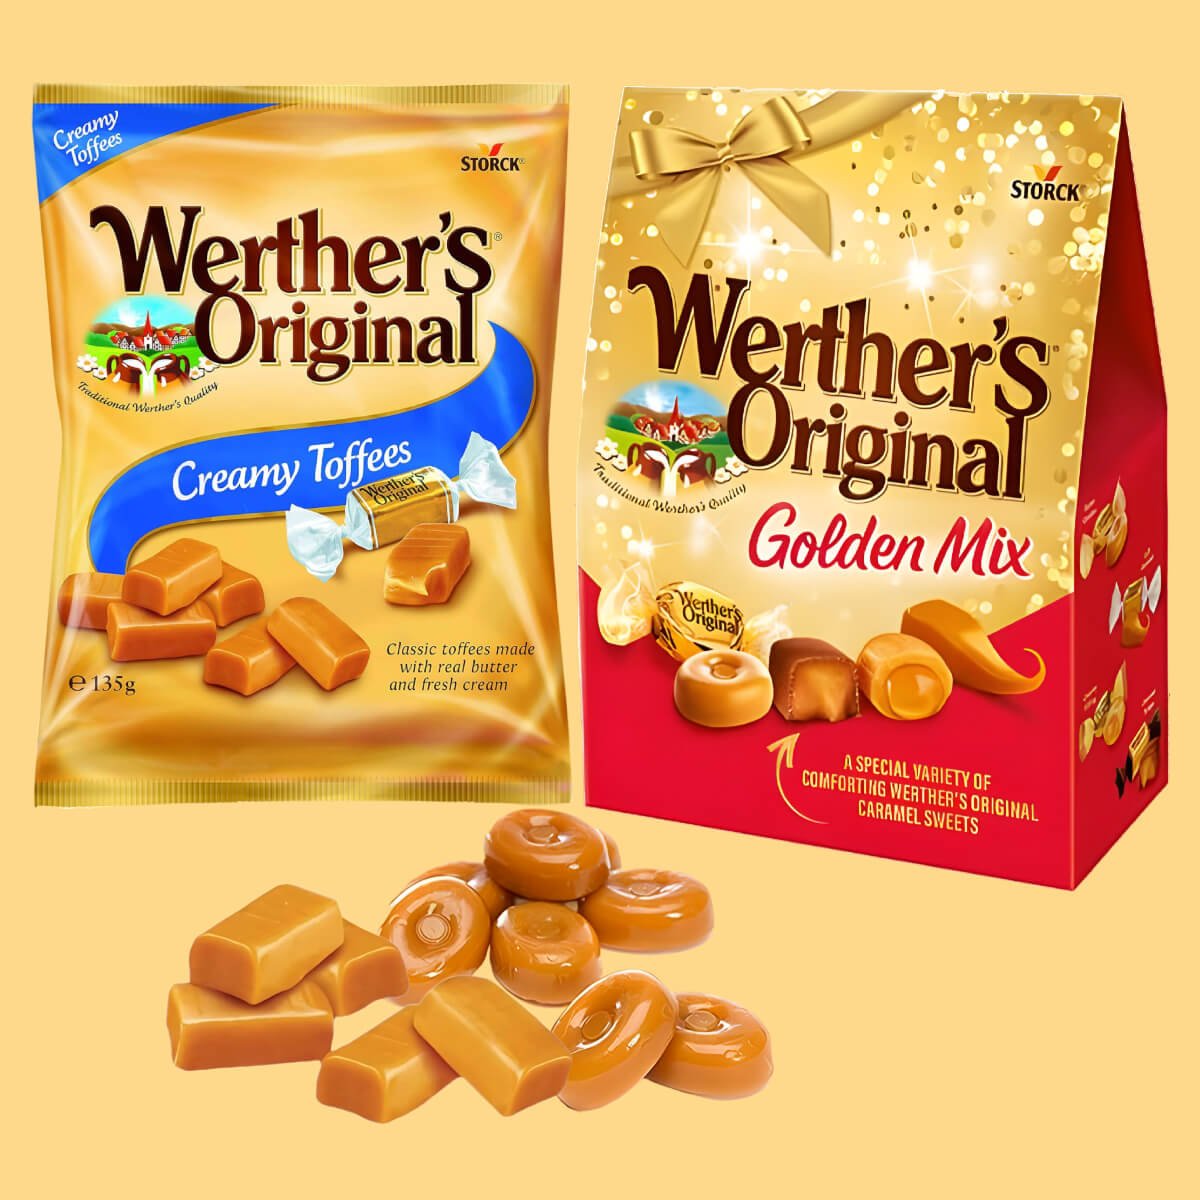 Werther's Original Creamy Toffees and Golden Mix